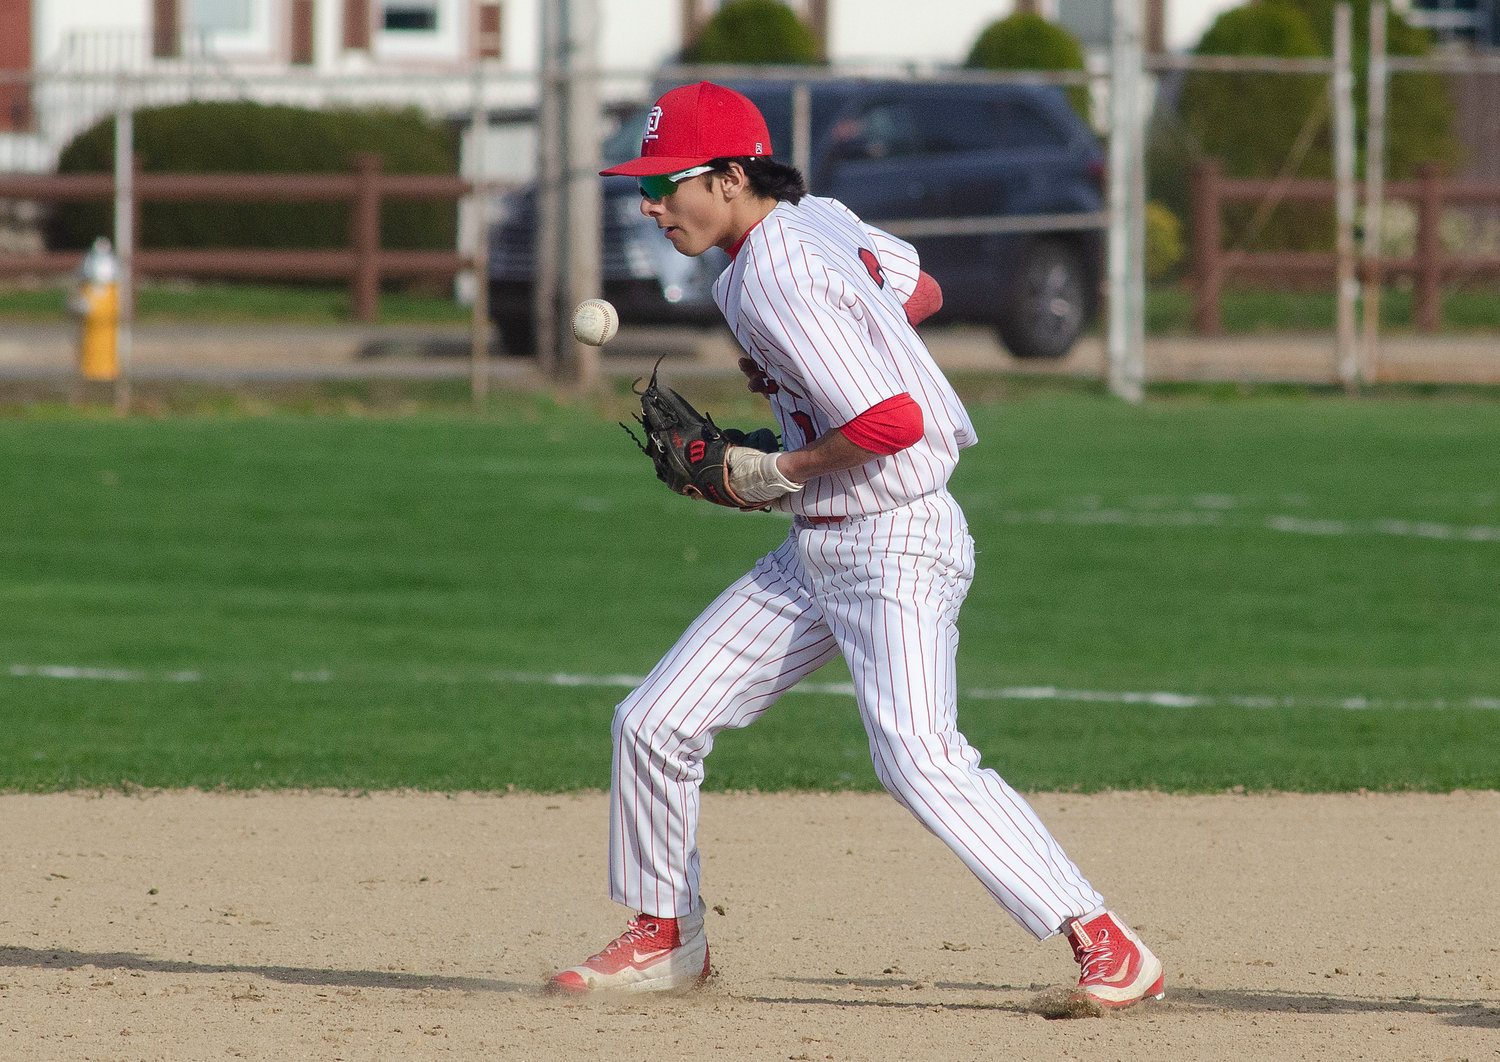 Second baseman Kyler Lorenz bobbles a sharp grounder allowing Barrington runners to advance to first and second.